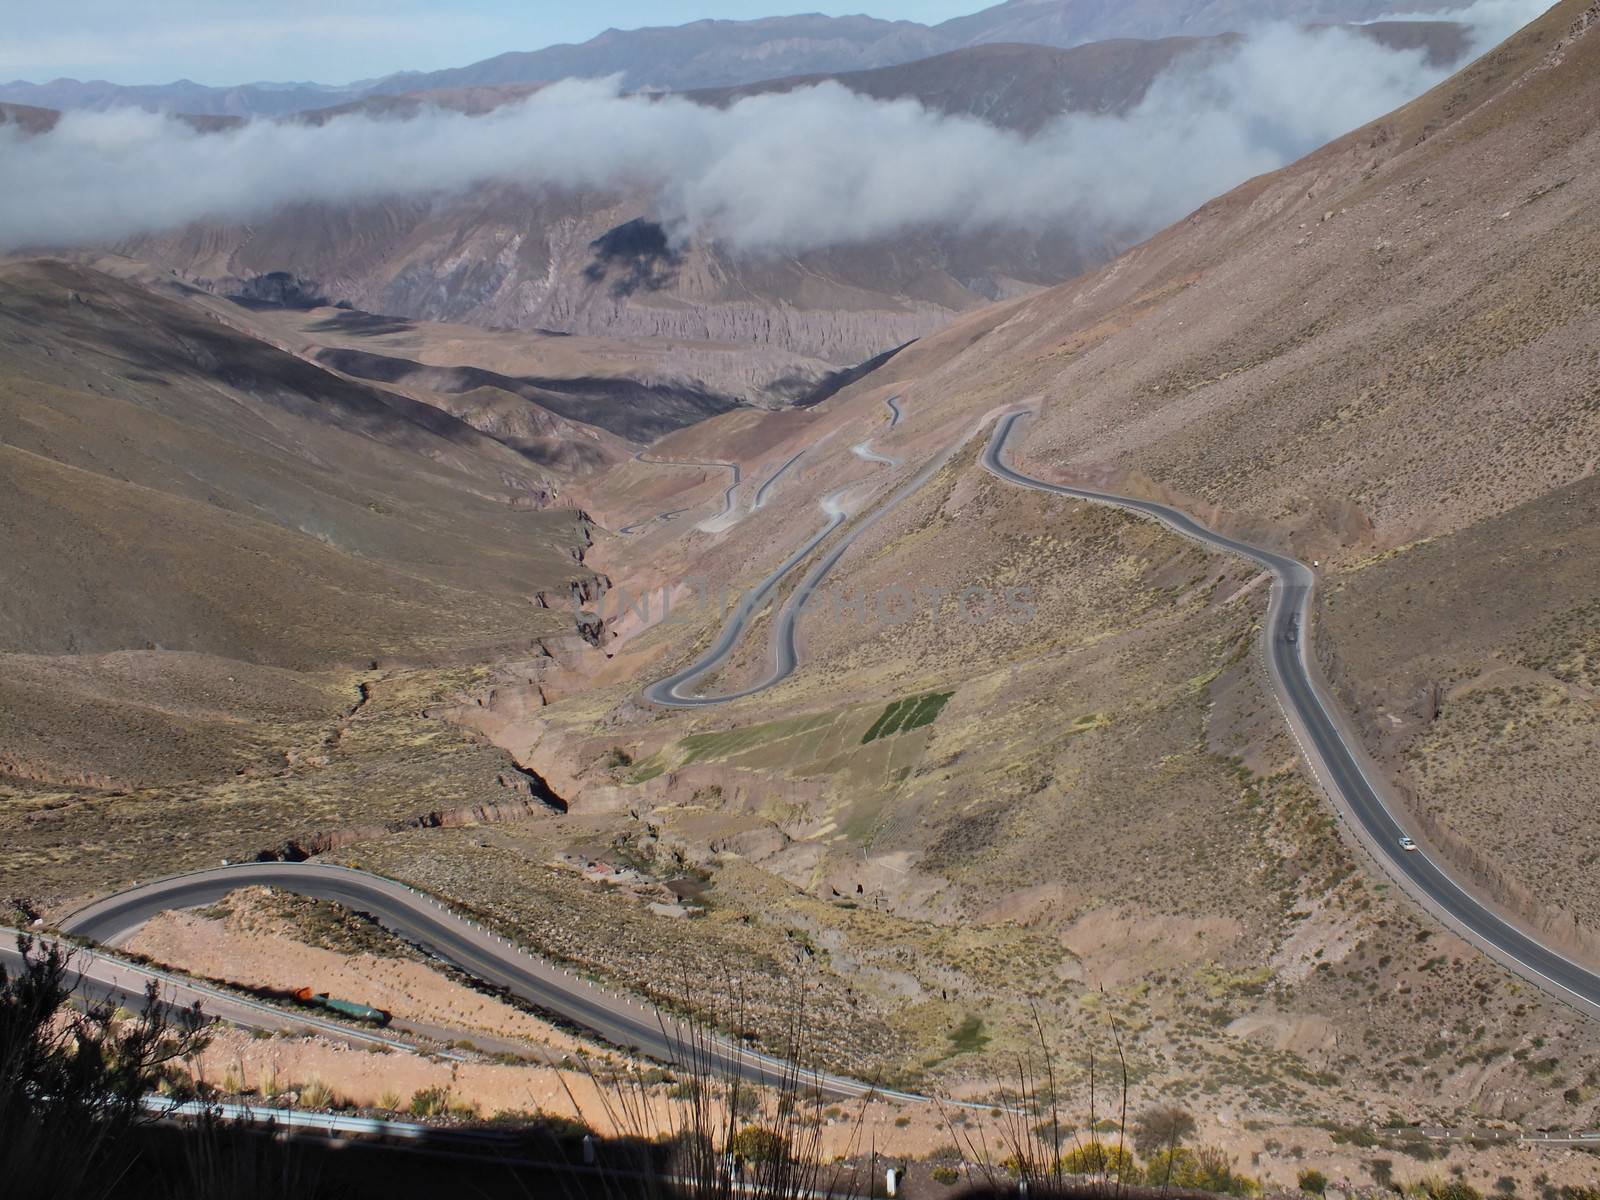 Hairpin bends leading up the Cuesta del Lipan by glynspencer